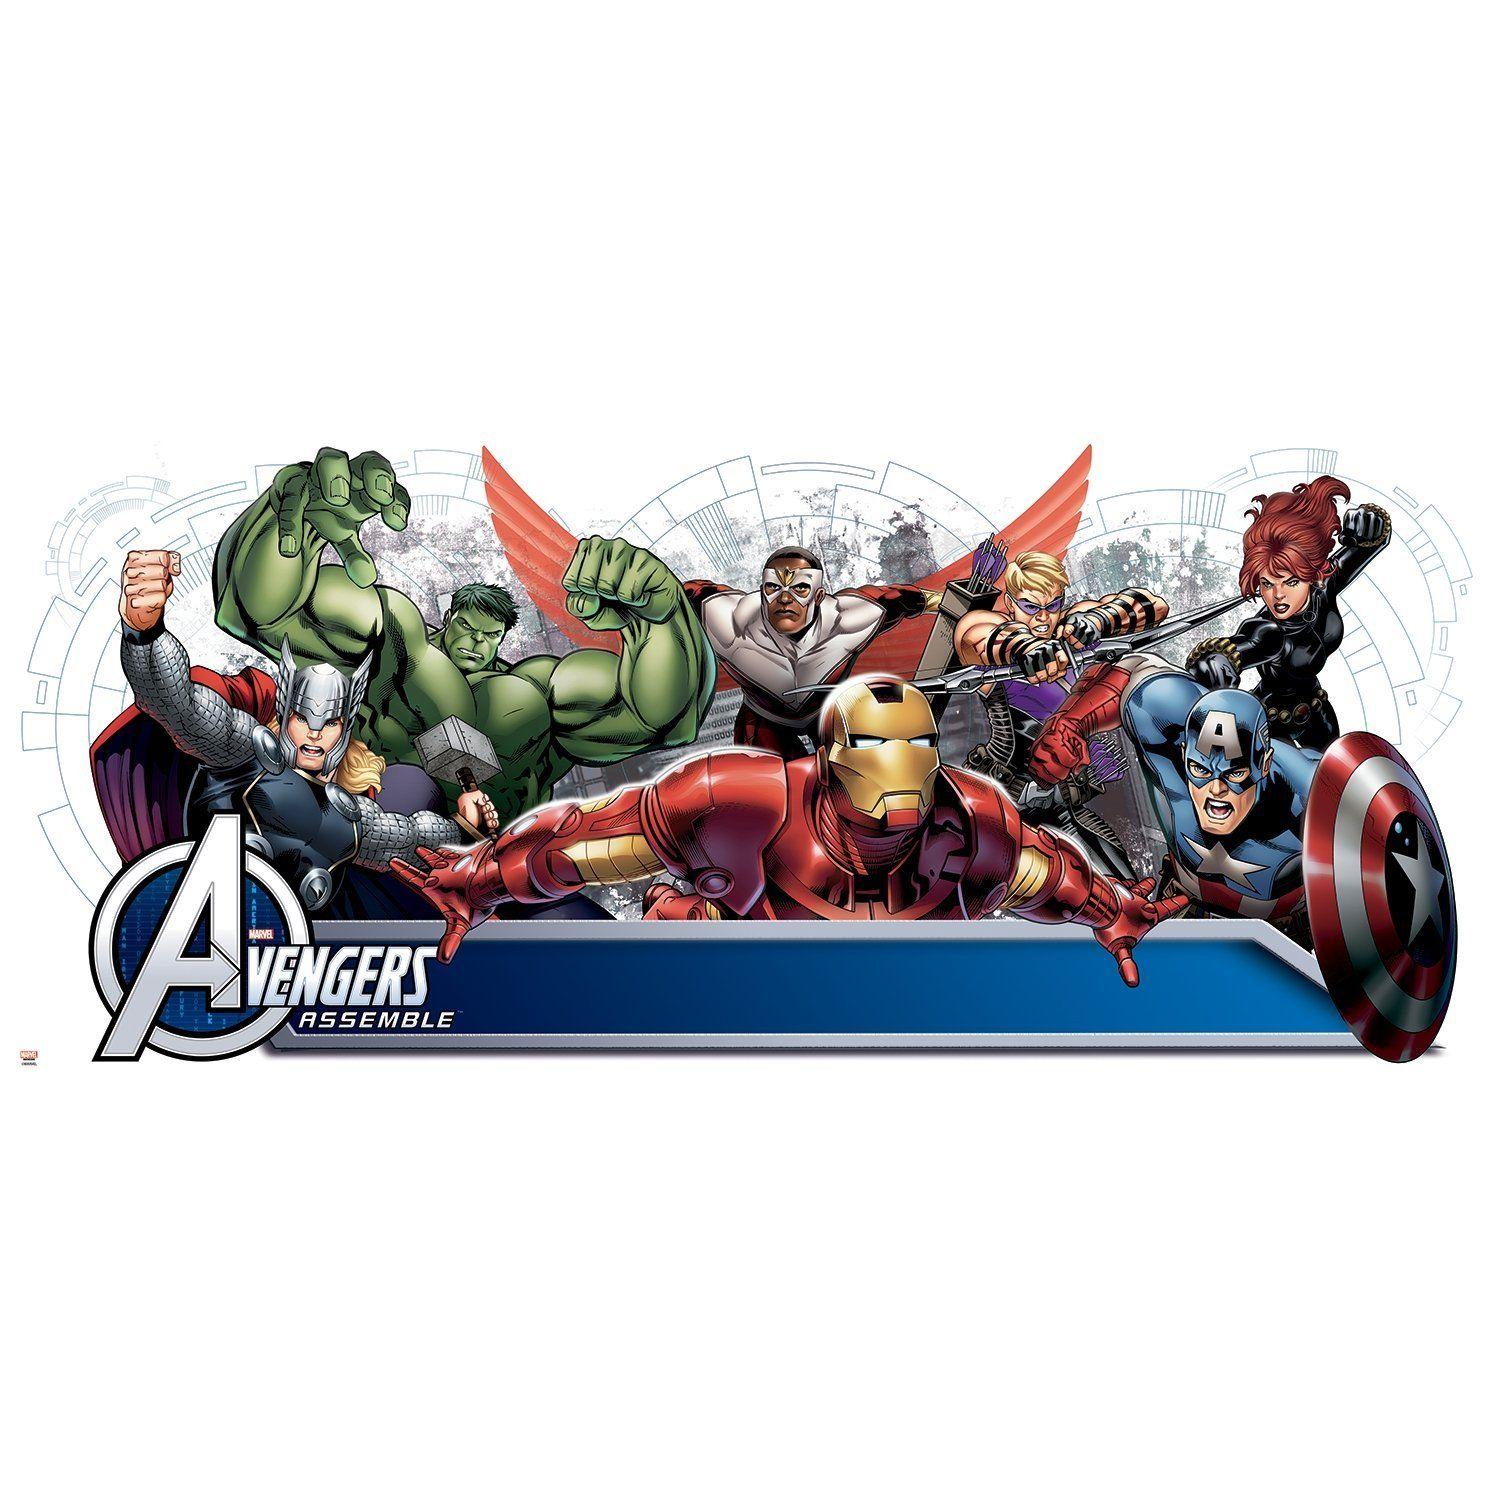 Avengers Assemble Headboard Giant Wall Decal with Alphabet